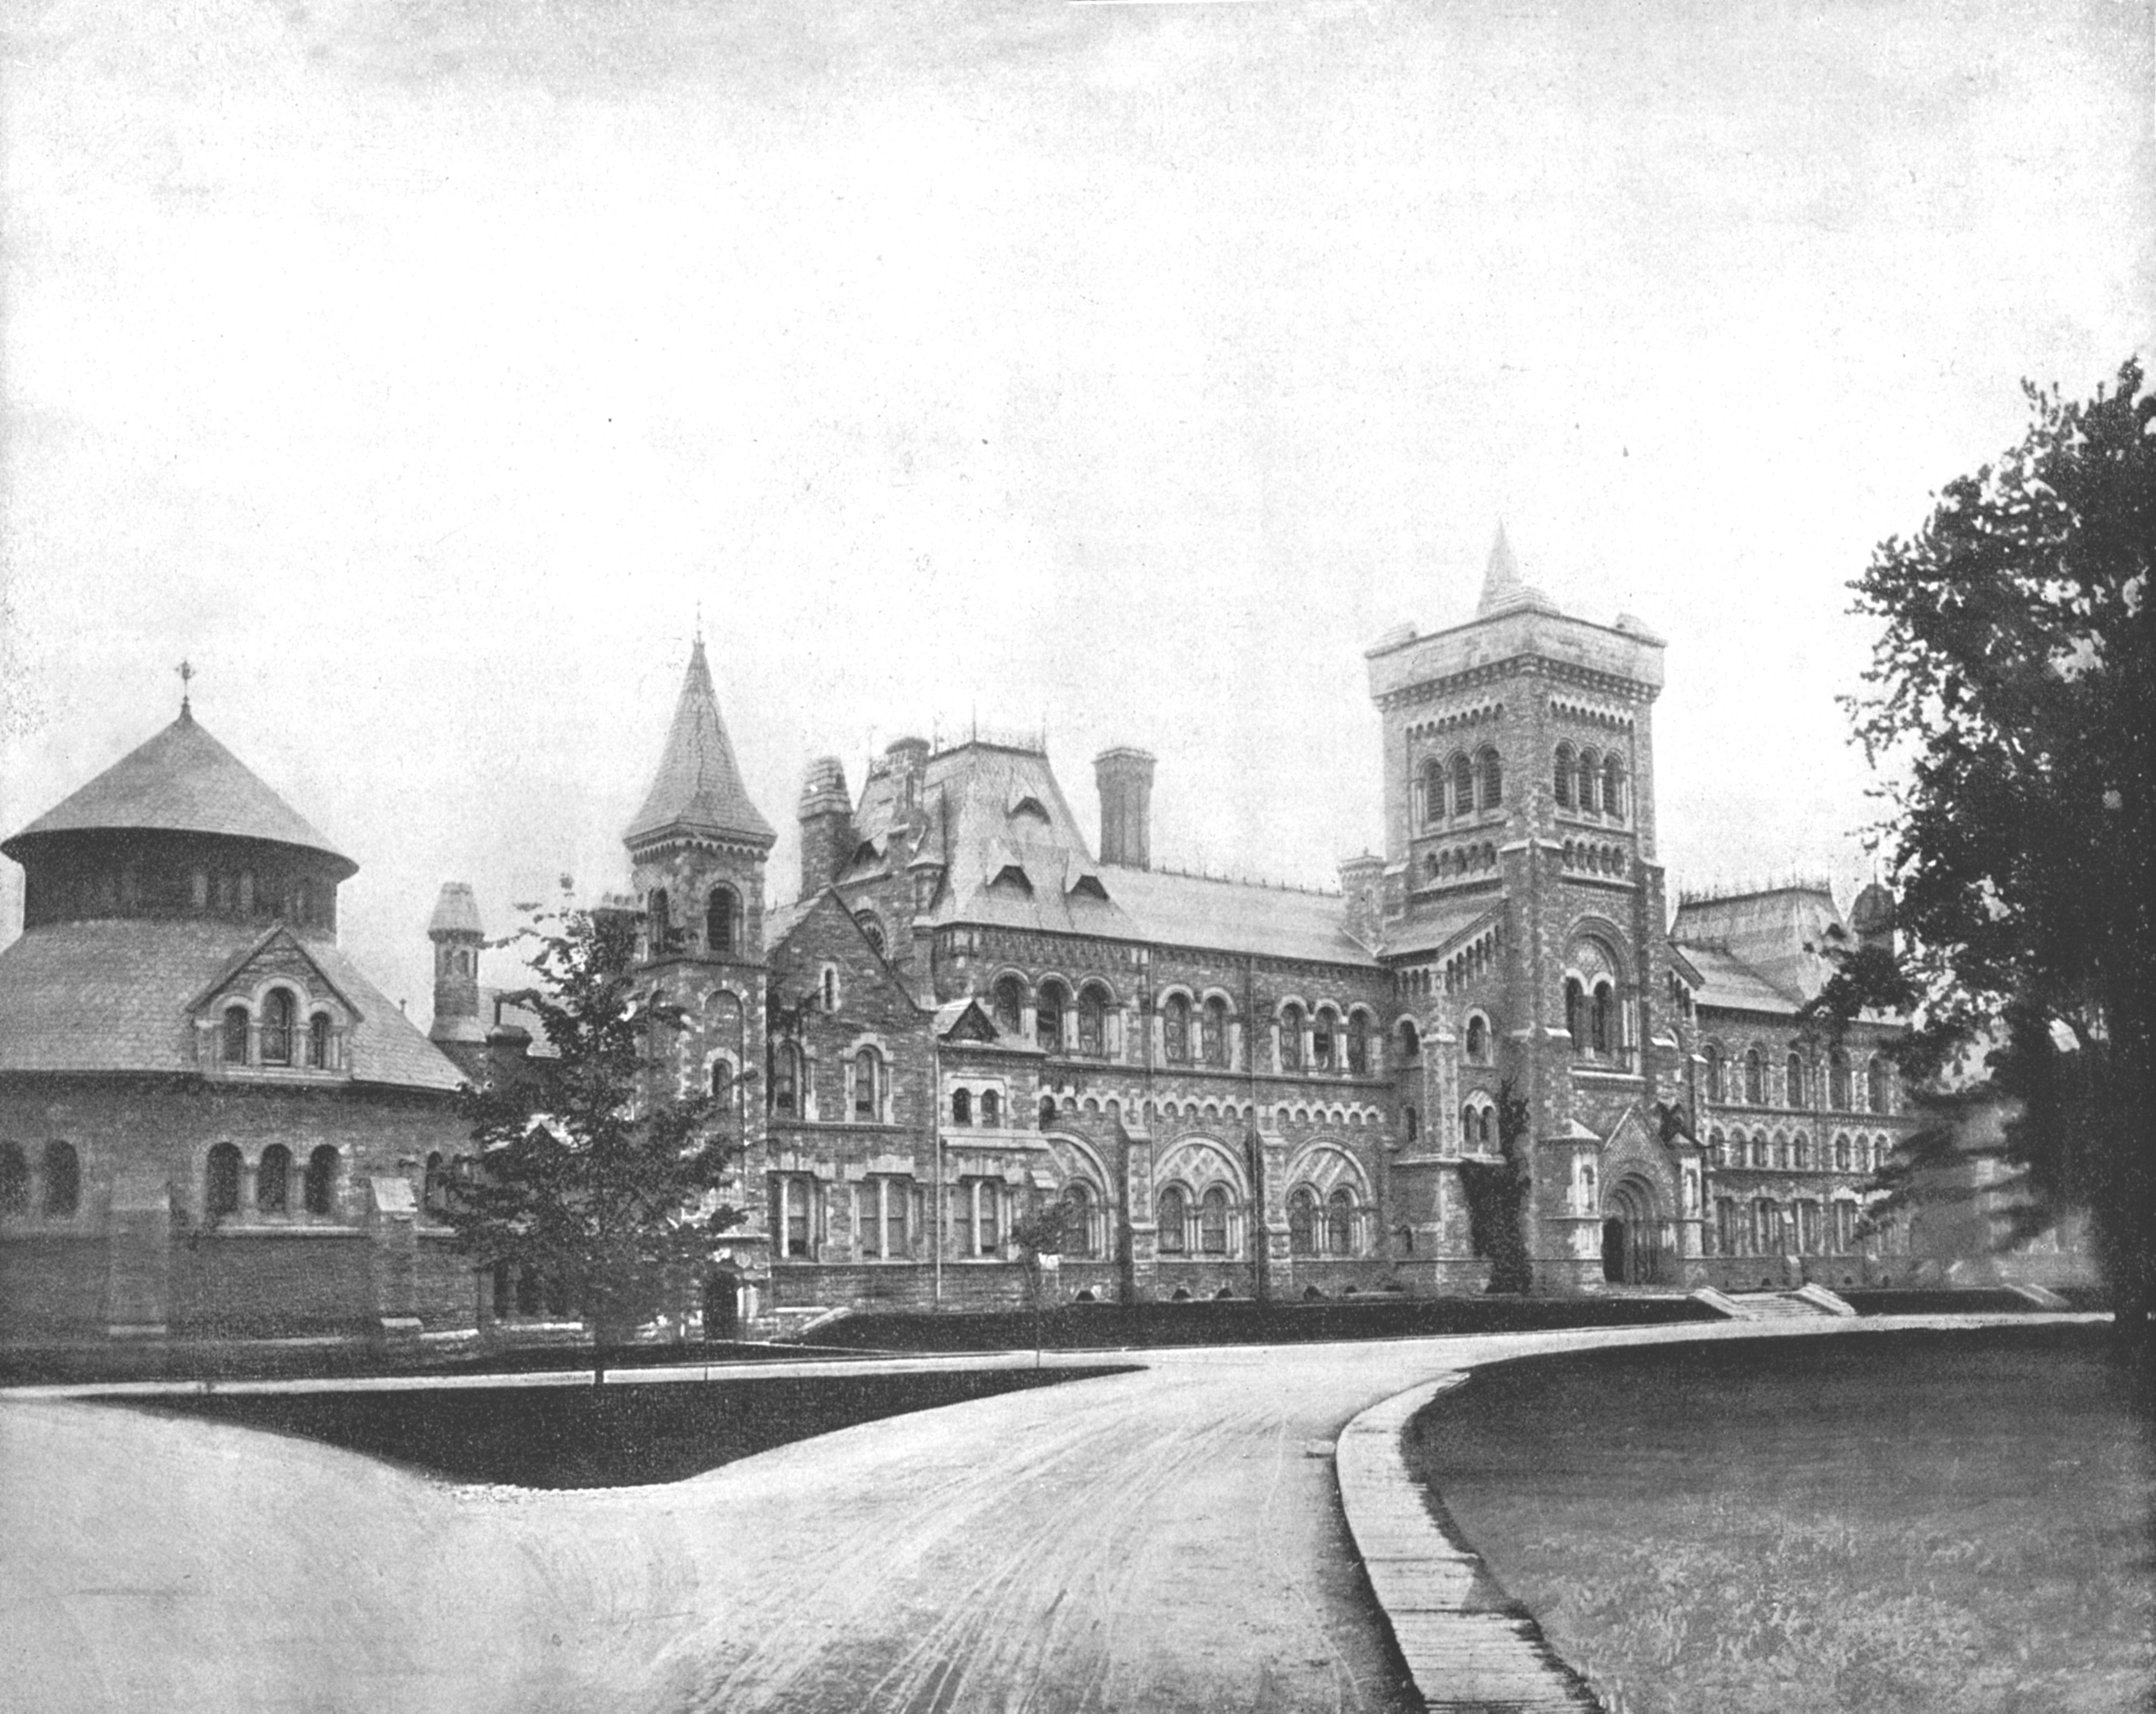 UofT physics building in black and white.